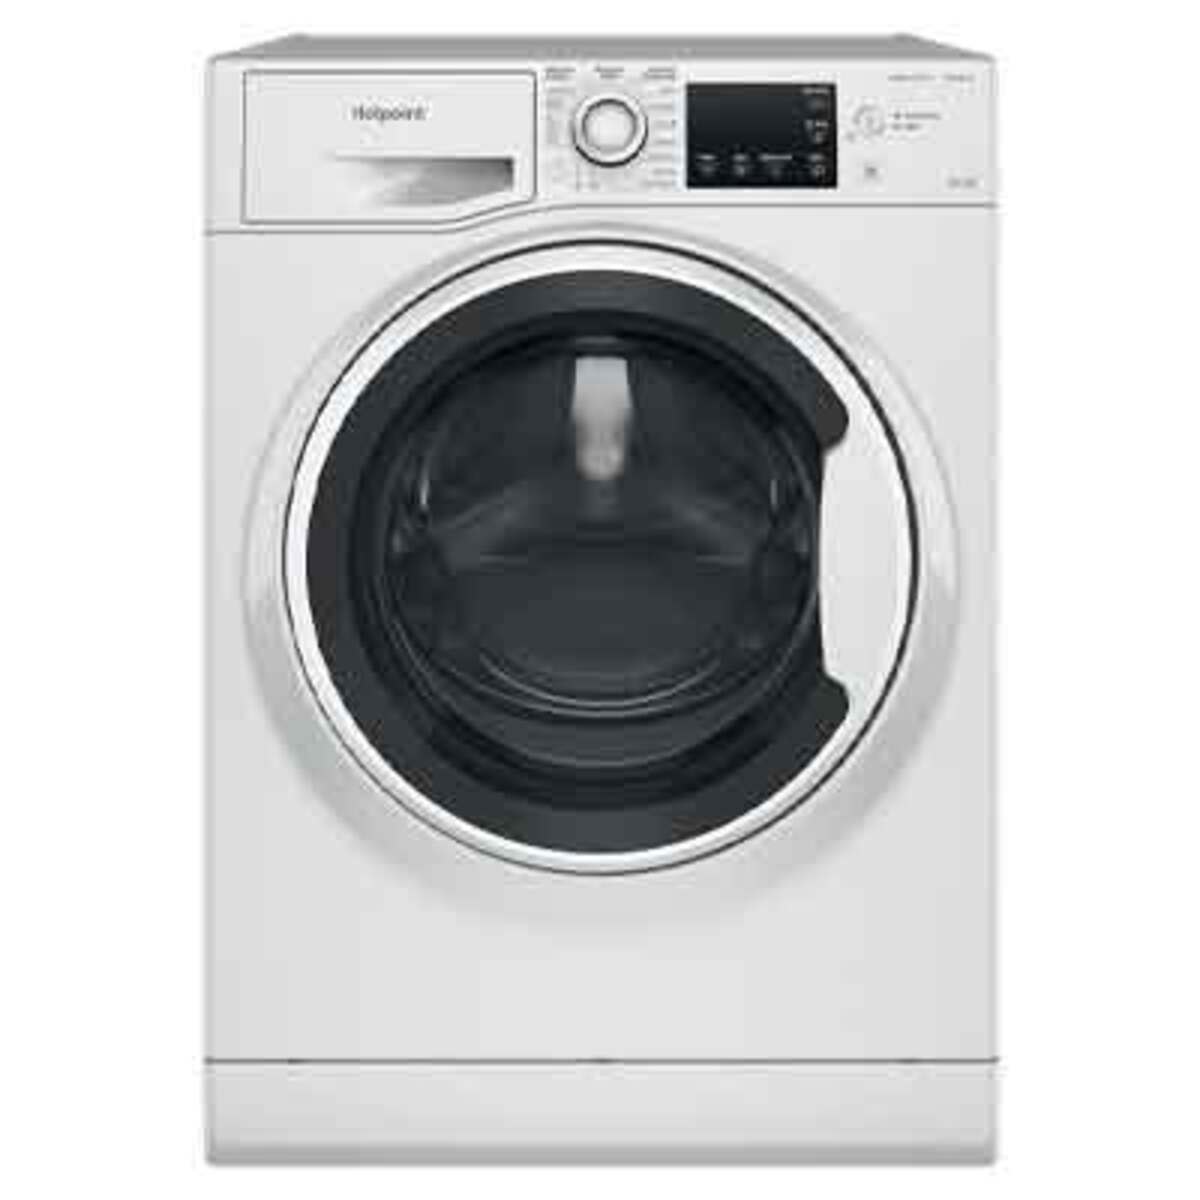 Hotpoint NDBE9635WUK 9kg / 6kg 1400 Spin Washer Dryer in White